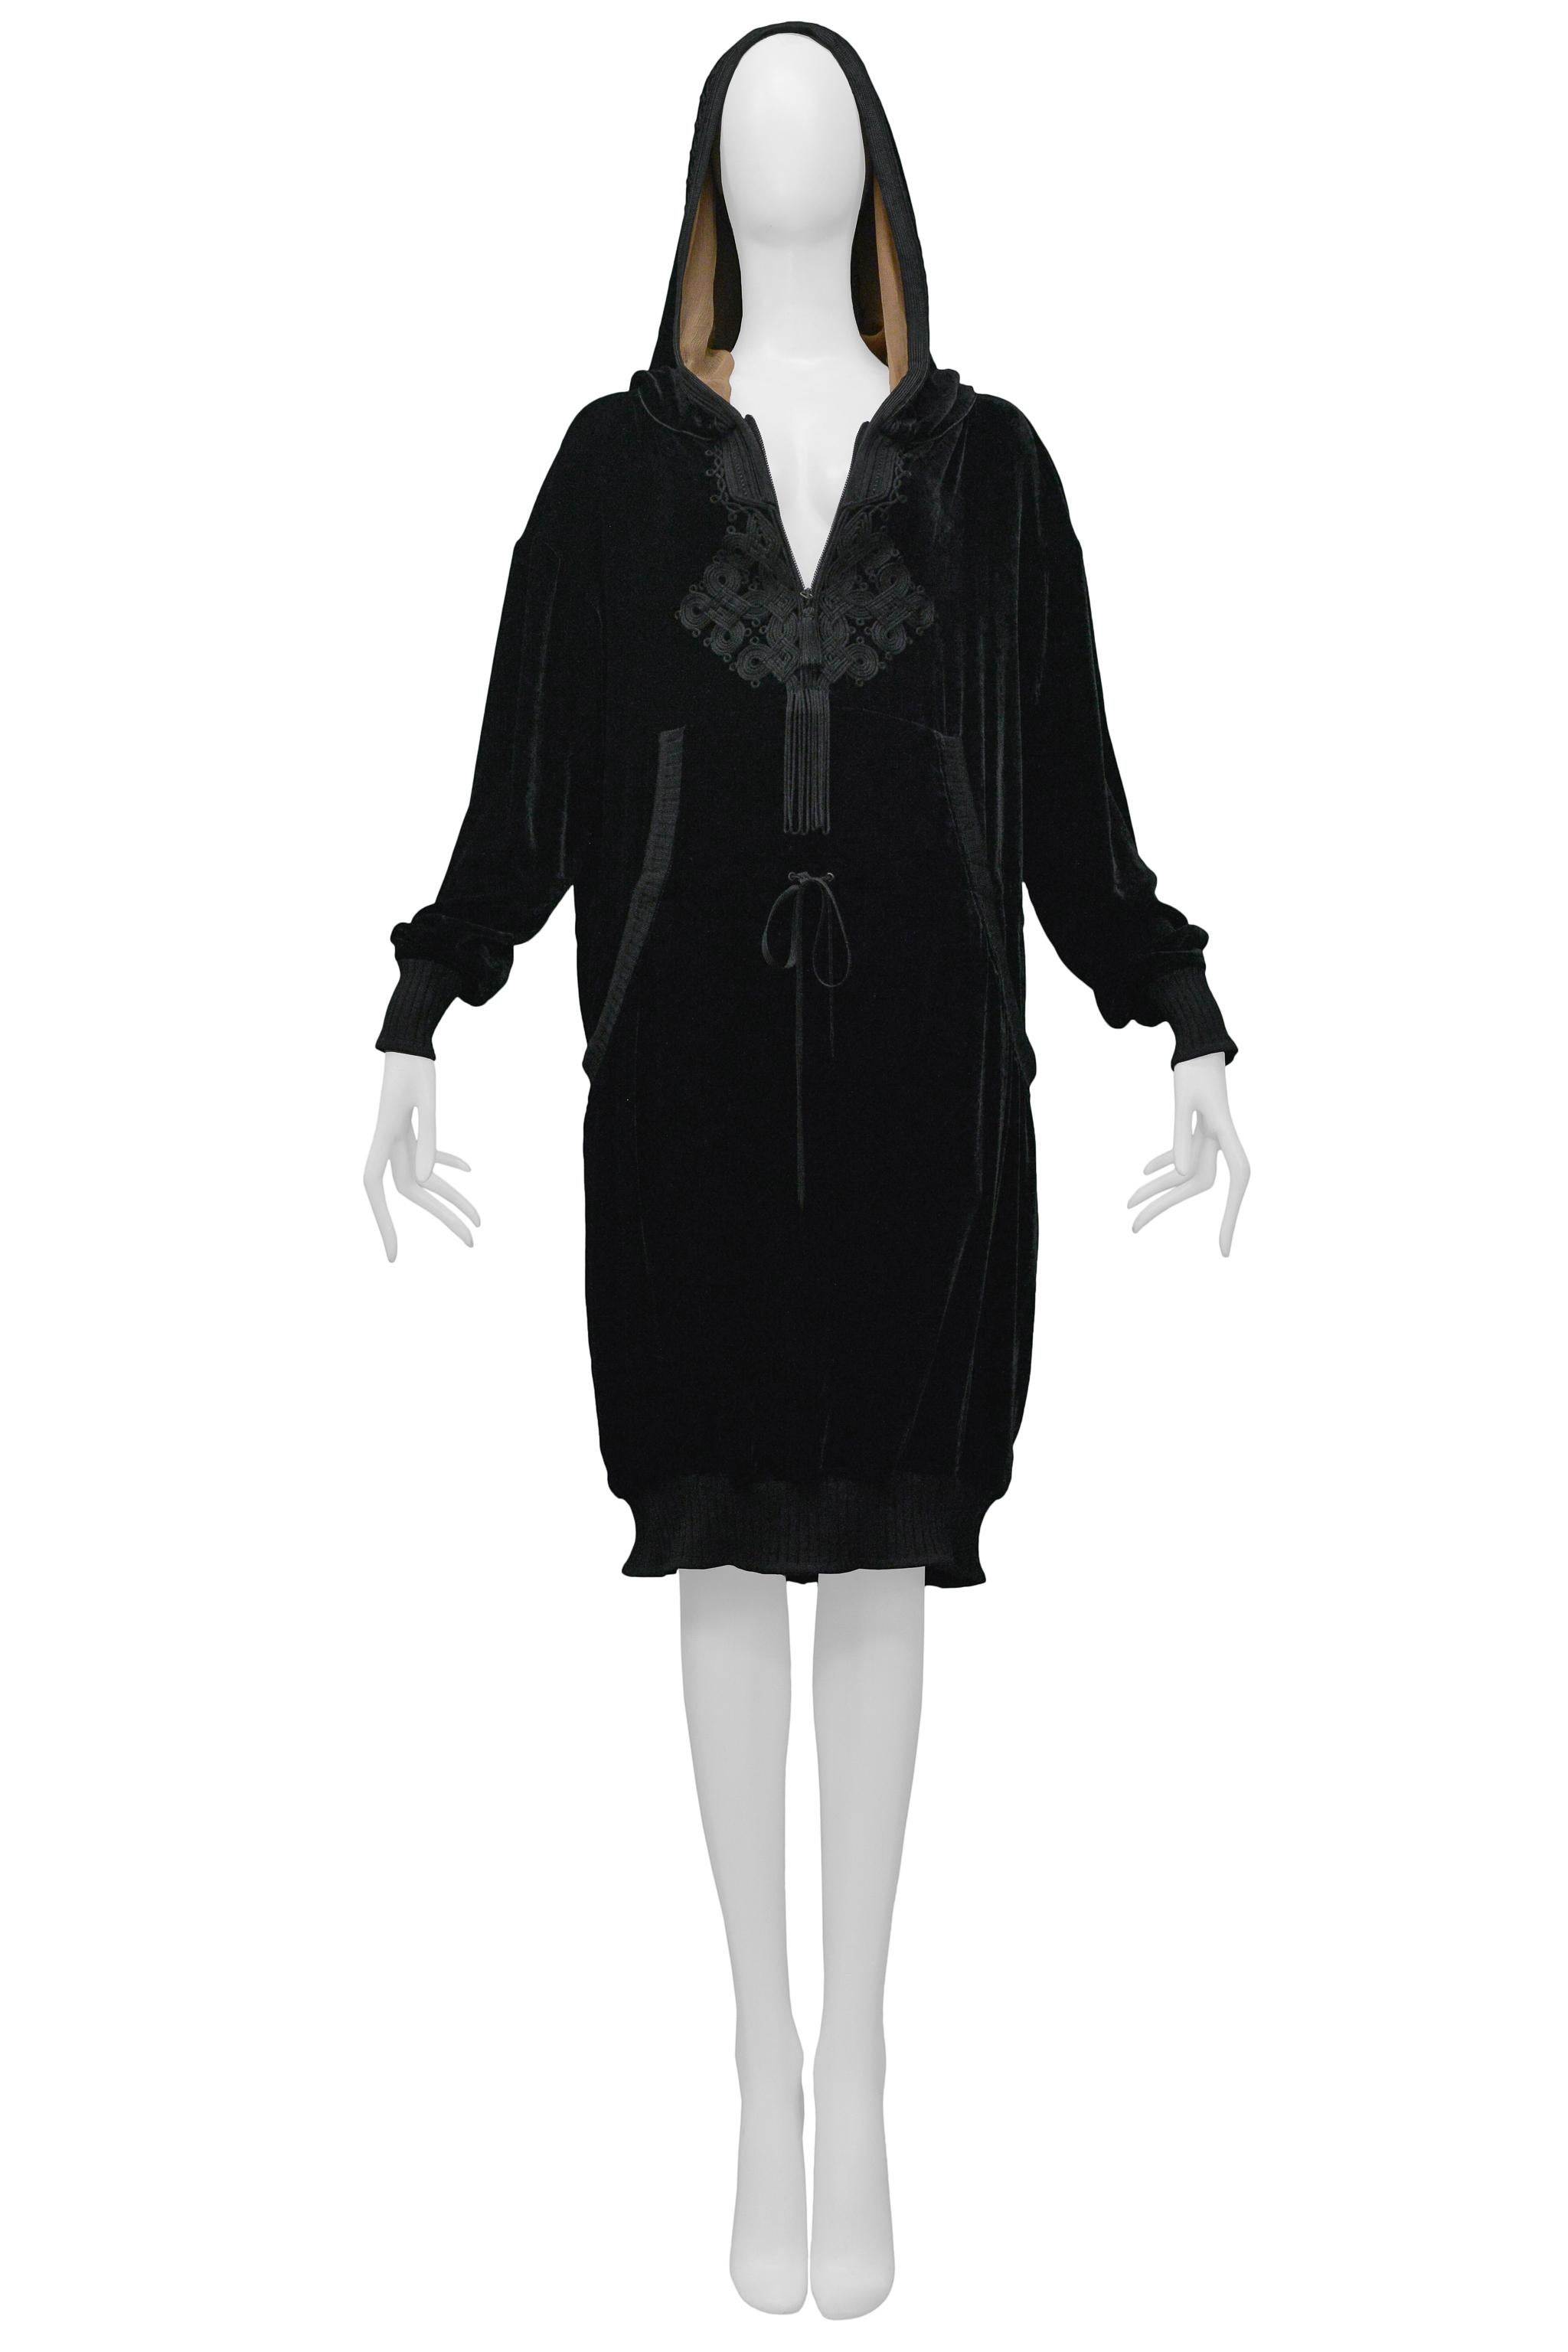 Resurrection Vintage is excited to offer a vintage Jean Paul Gaultier black velvet tunic dress featuring an embroidered pattern at the front, kangaroo pockets, a large tassel, and a hood lined with beige chiffon.

Jean Paul Gaultier
Size: 42
80%